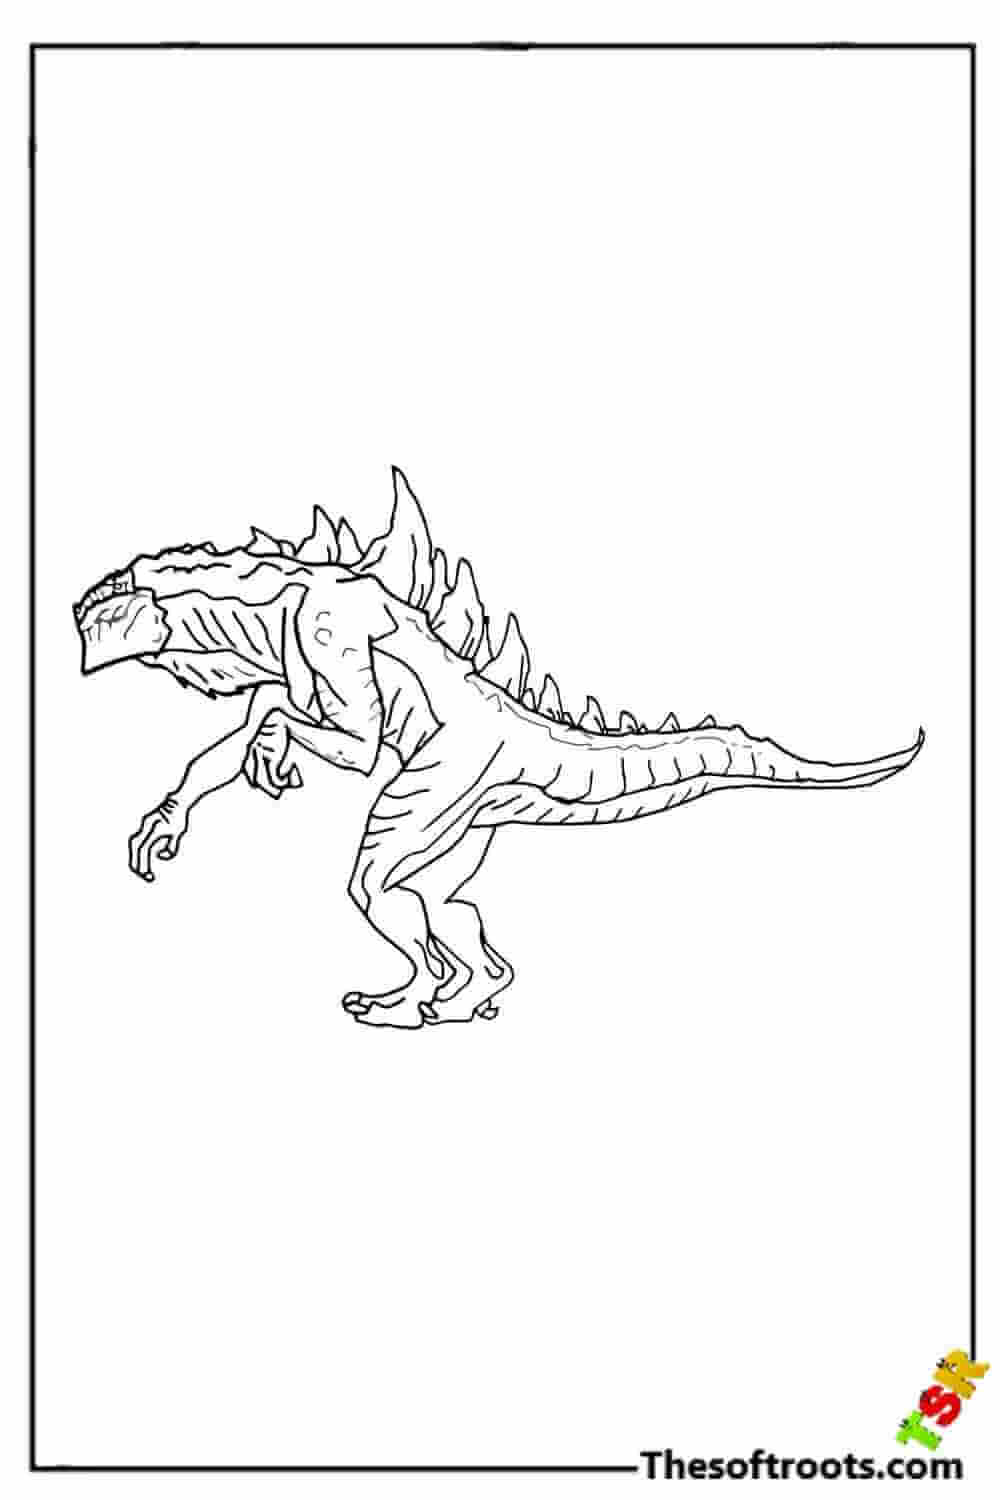 Giant Godzilla coloring pages